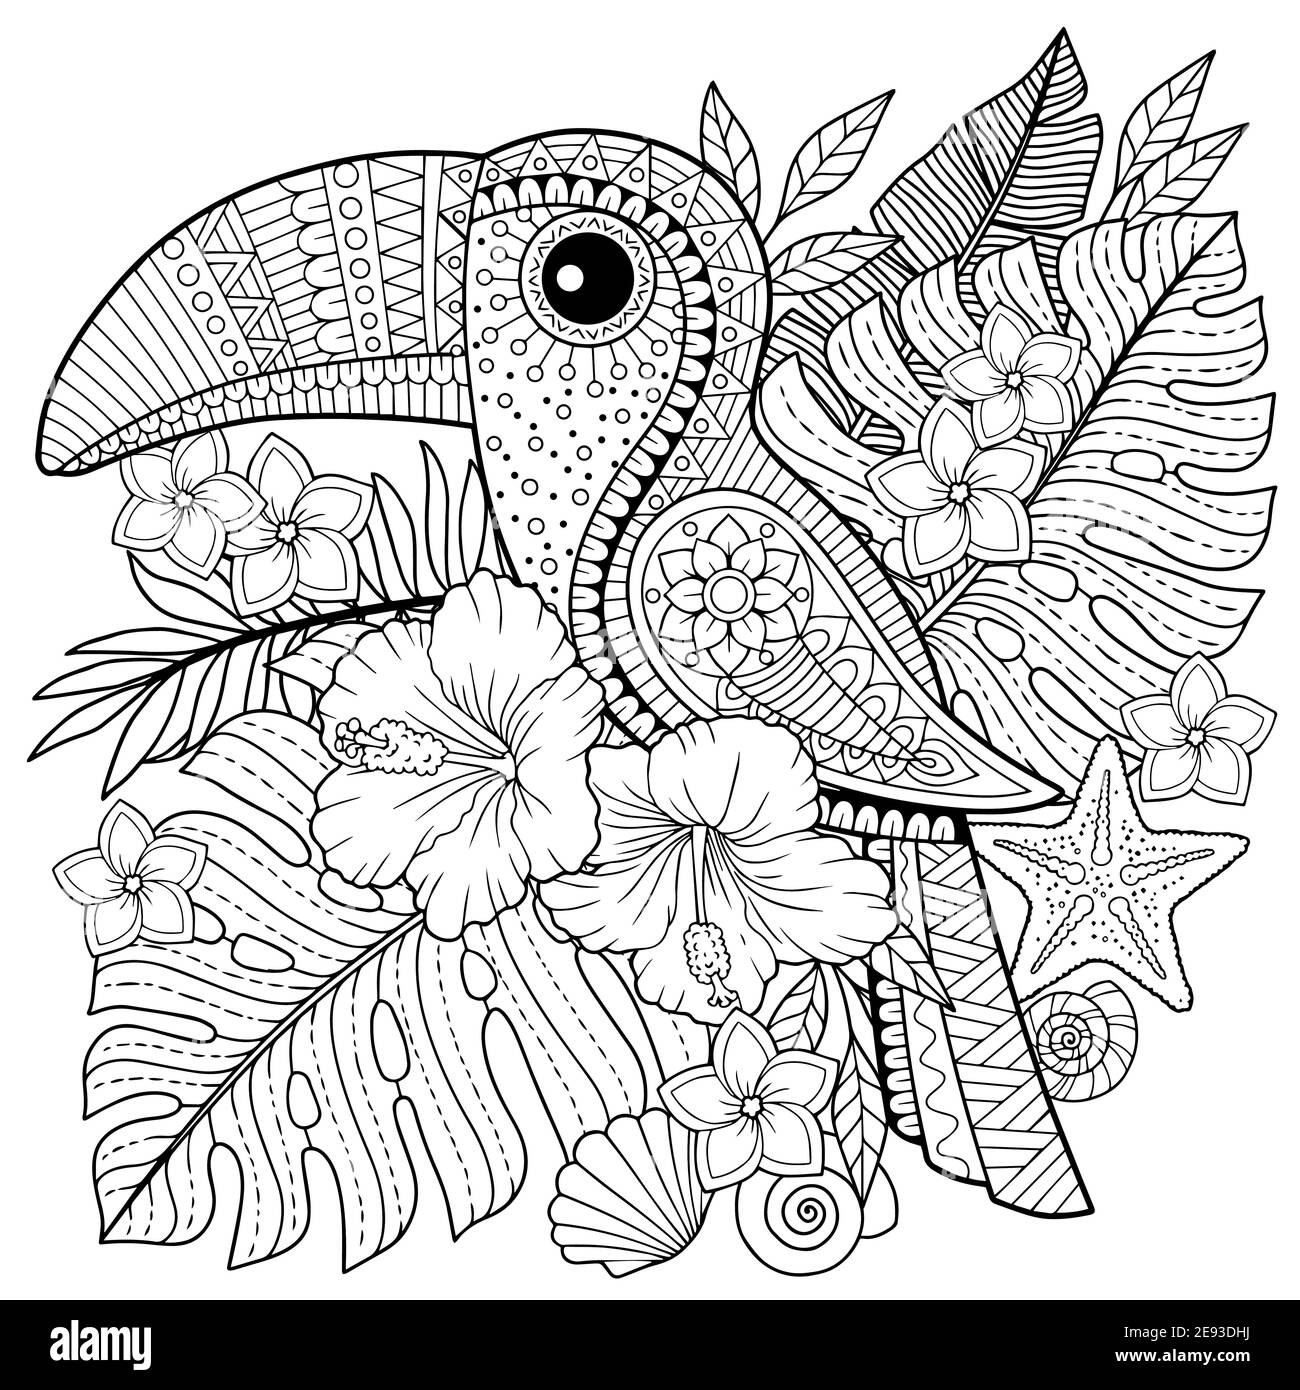 Coloring book for adults. Toucan among tropical leaves and flowers. Coloring page for relax and relif Stock Vector